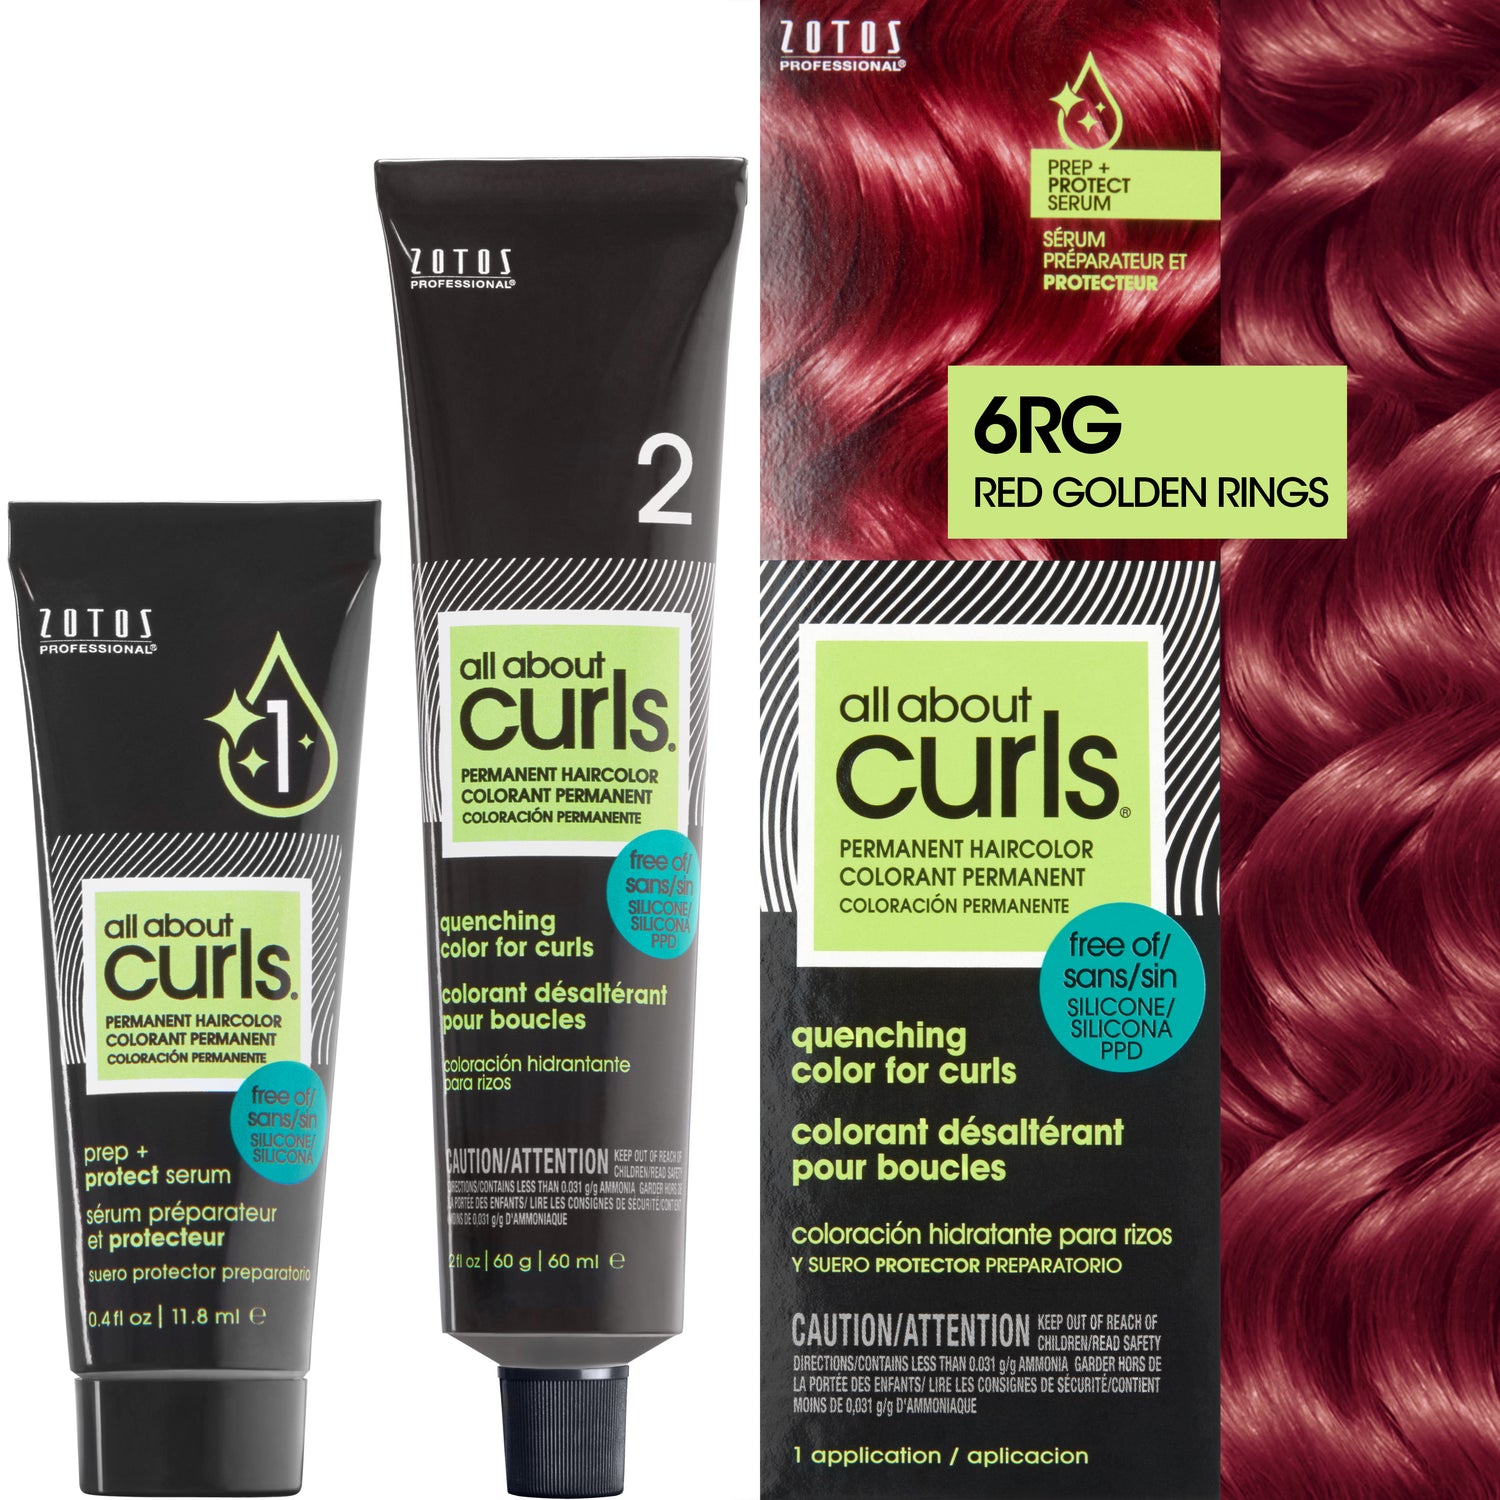 Two bottles and packaging for All About Curls Permanent Color in shade 6RG Red Golden Rings.